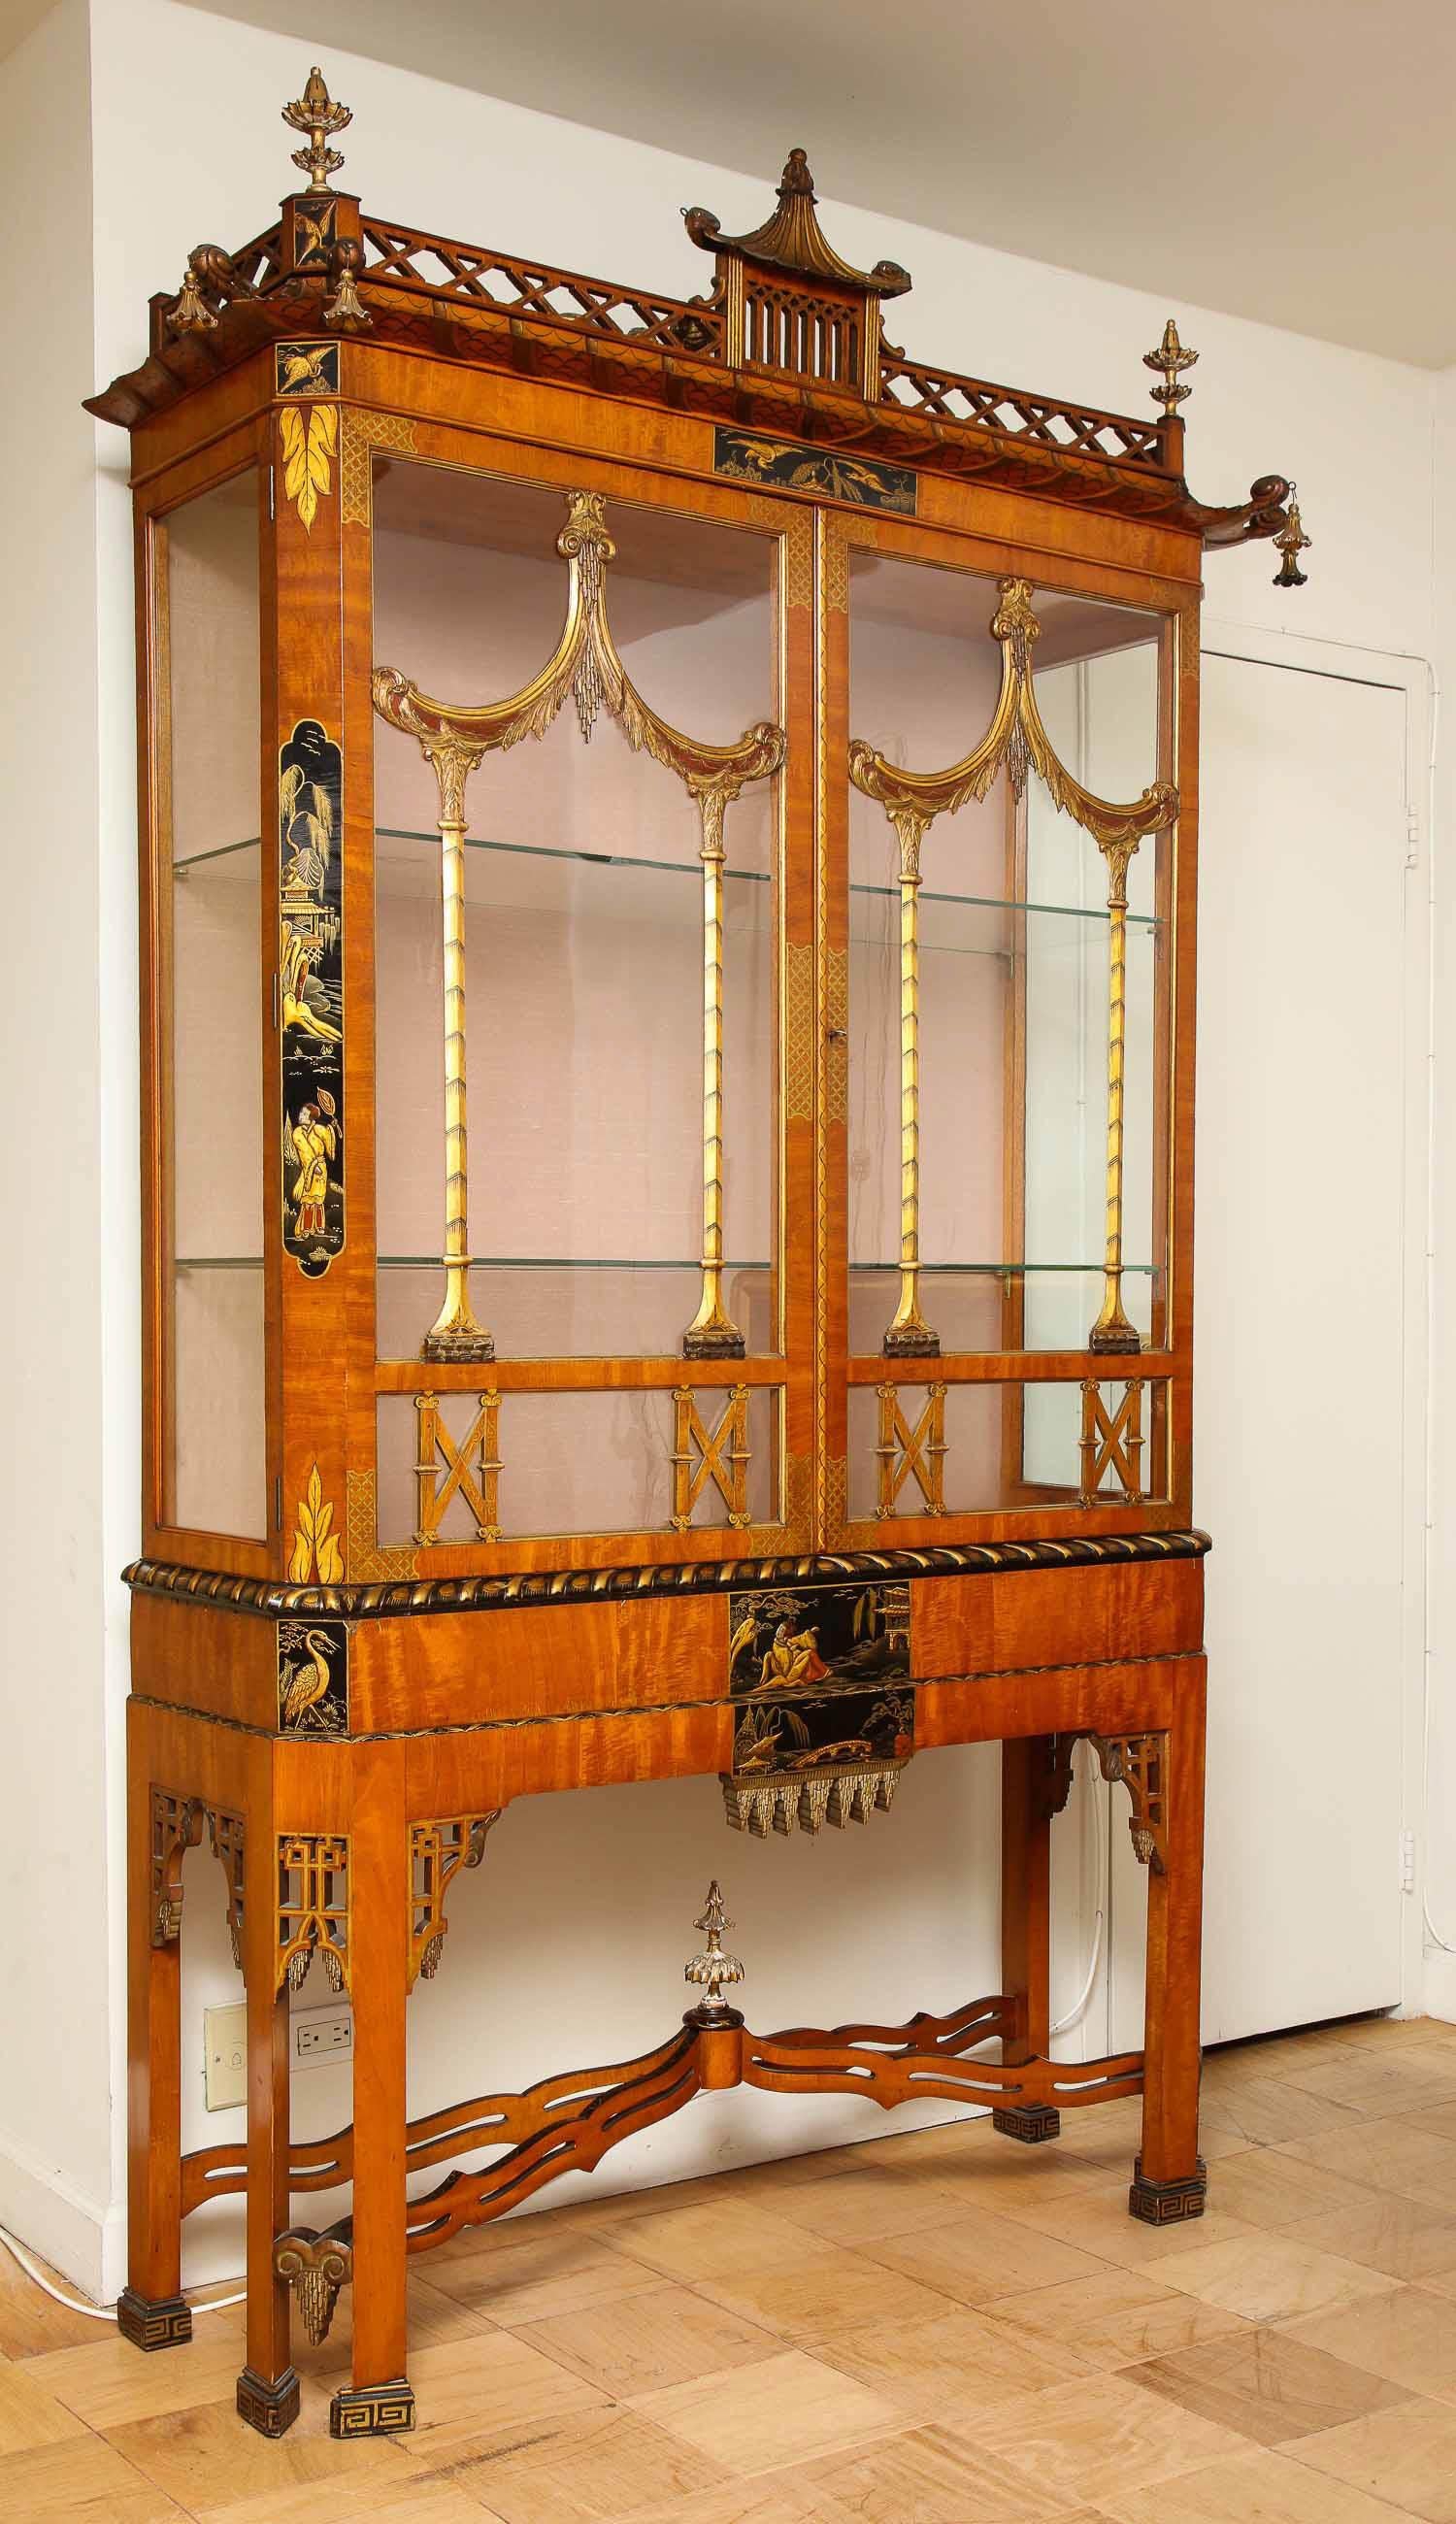 A quite unusual 19th century English, 18th century style, chinoiserie pagoda shaped giltwood and black lacquered vitrine/display cabinet/showcase. Beautifully hand carved, this gorgeous vitrine exemplifies the true essence of the 18th century